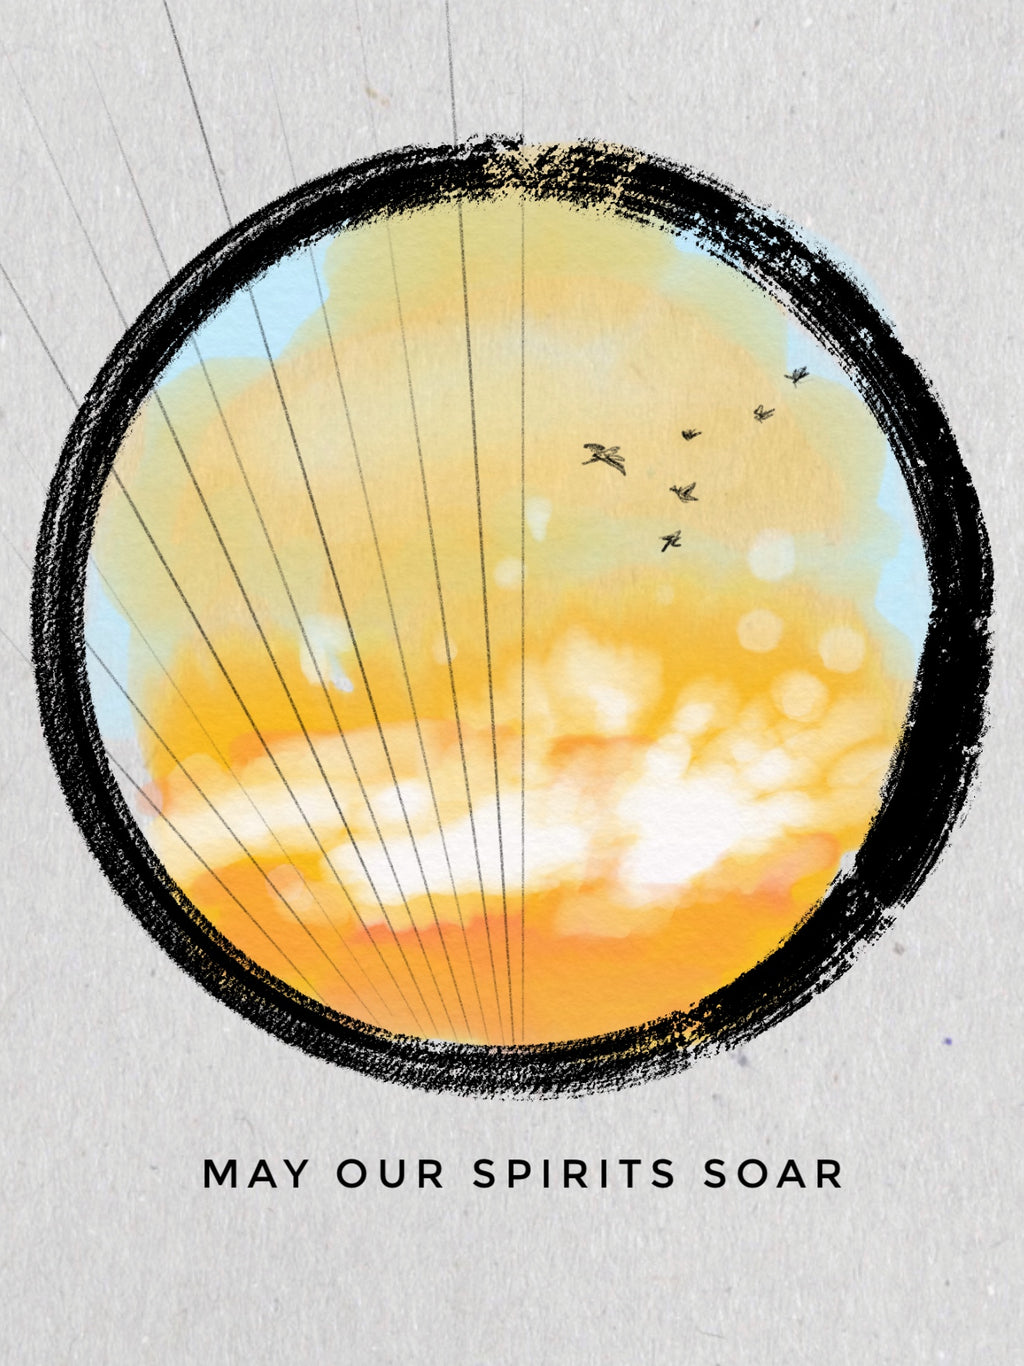 "May our Spirits Soar" digital sketch by Erica Bapst